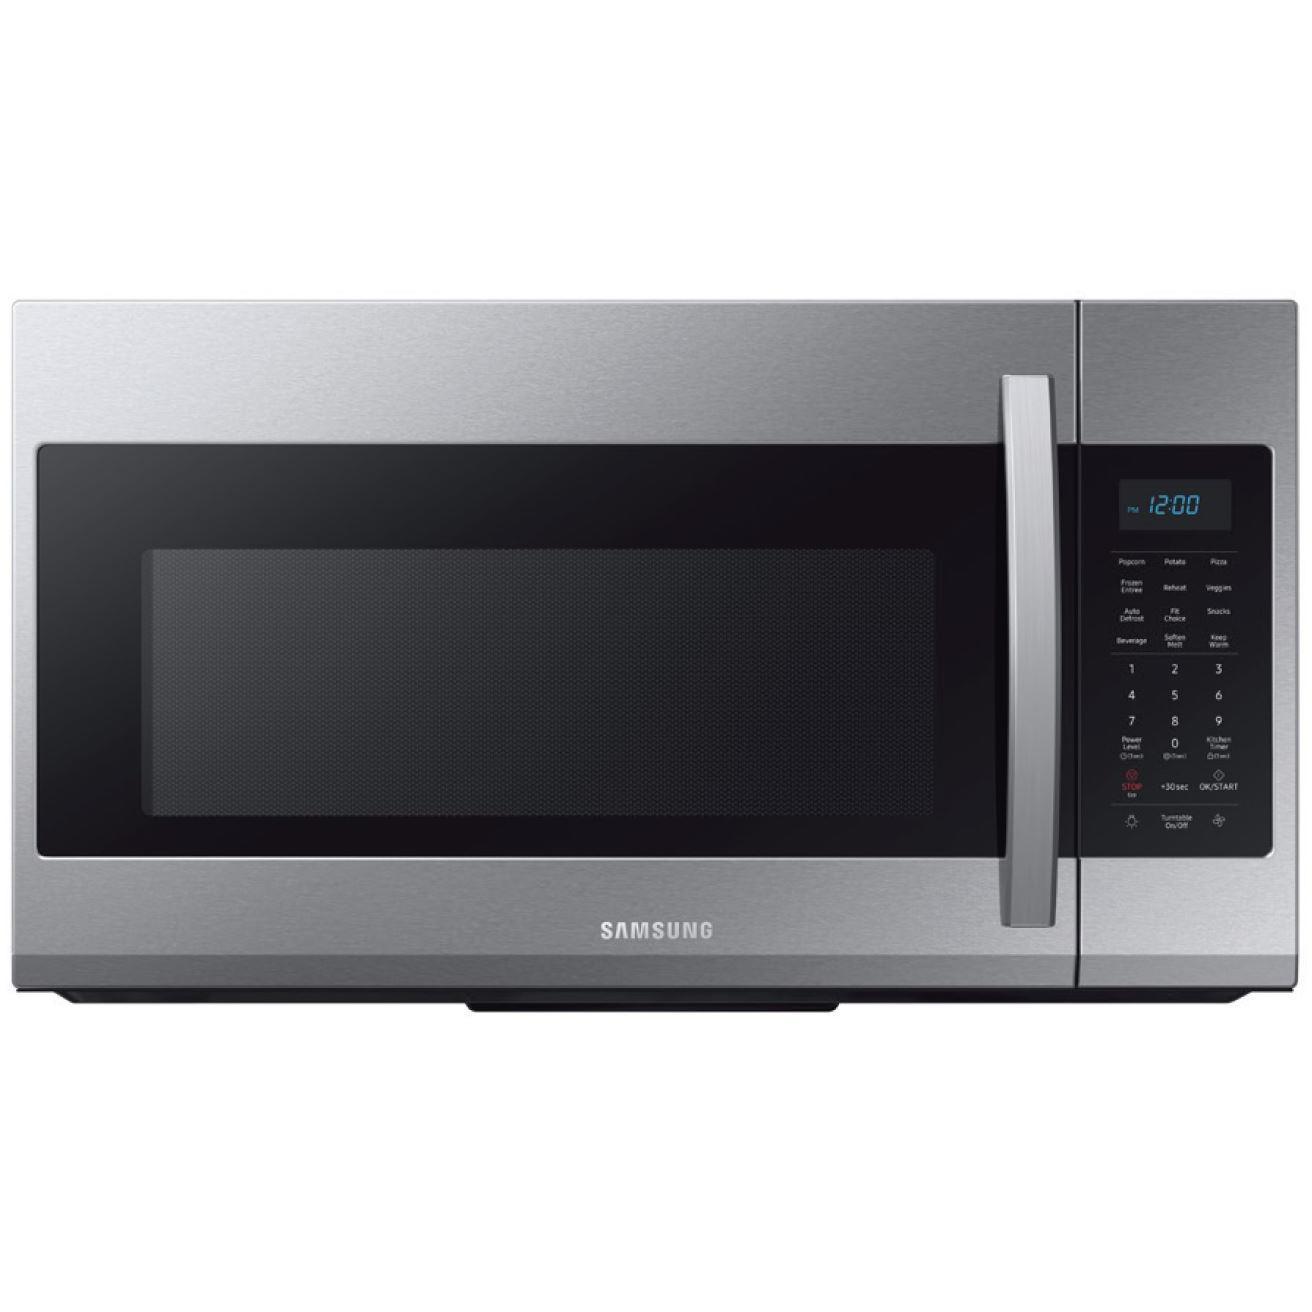 Samsung 30-inch, 1.9 cu.ft. Over-the-Range Microwave Oven with Eco Mode ME19R7041FS/AA